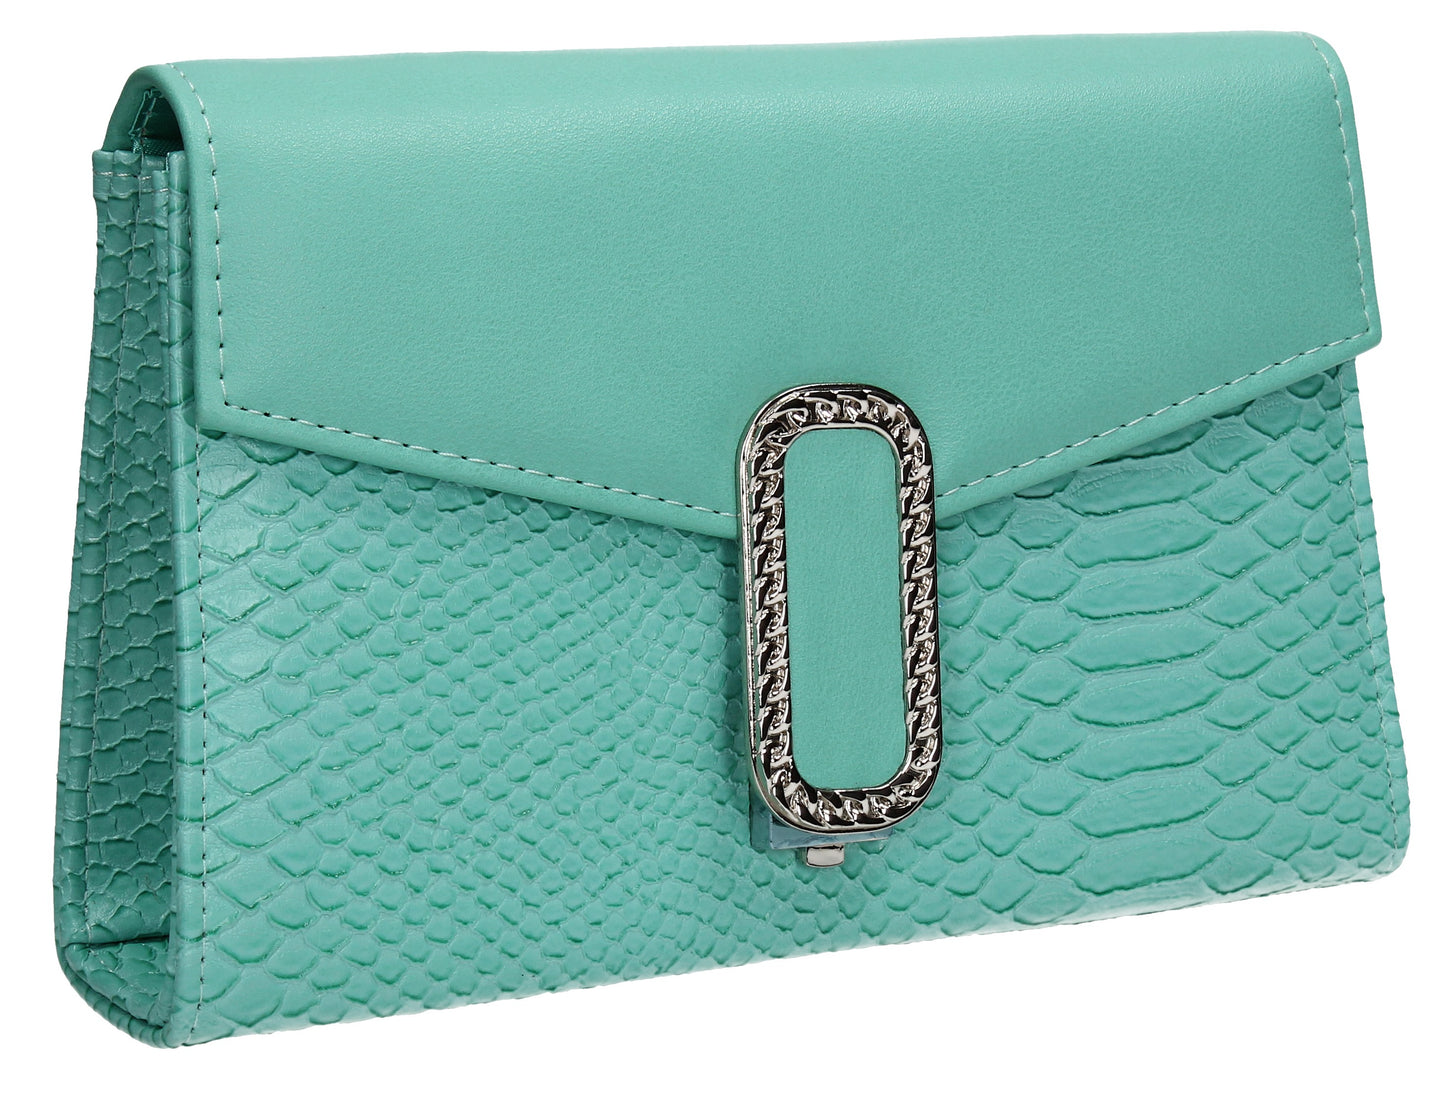 SWANKYSWANS Vanessa Clutch Bag Turquoise Cute Cheap Clutch Bag For Weddings School and Work